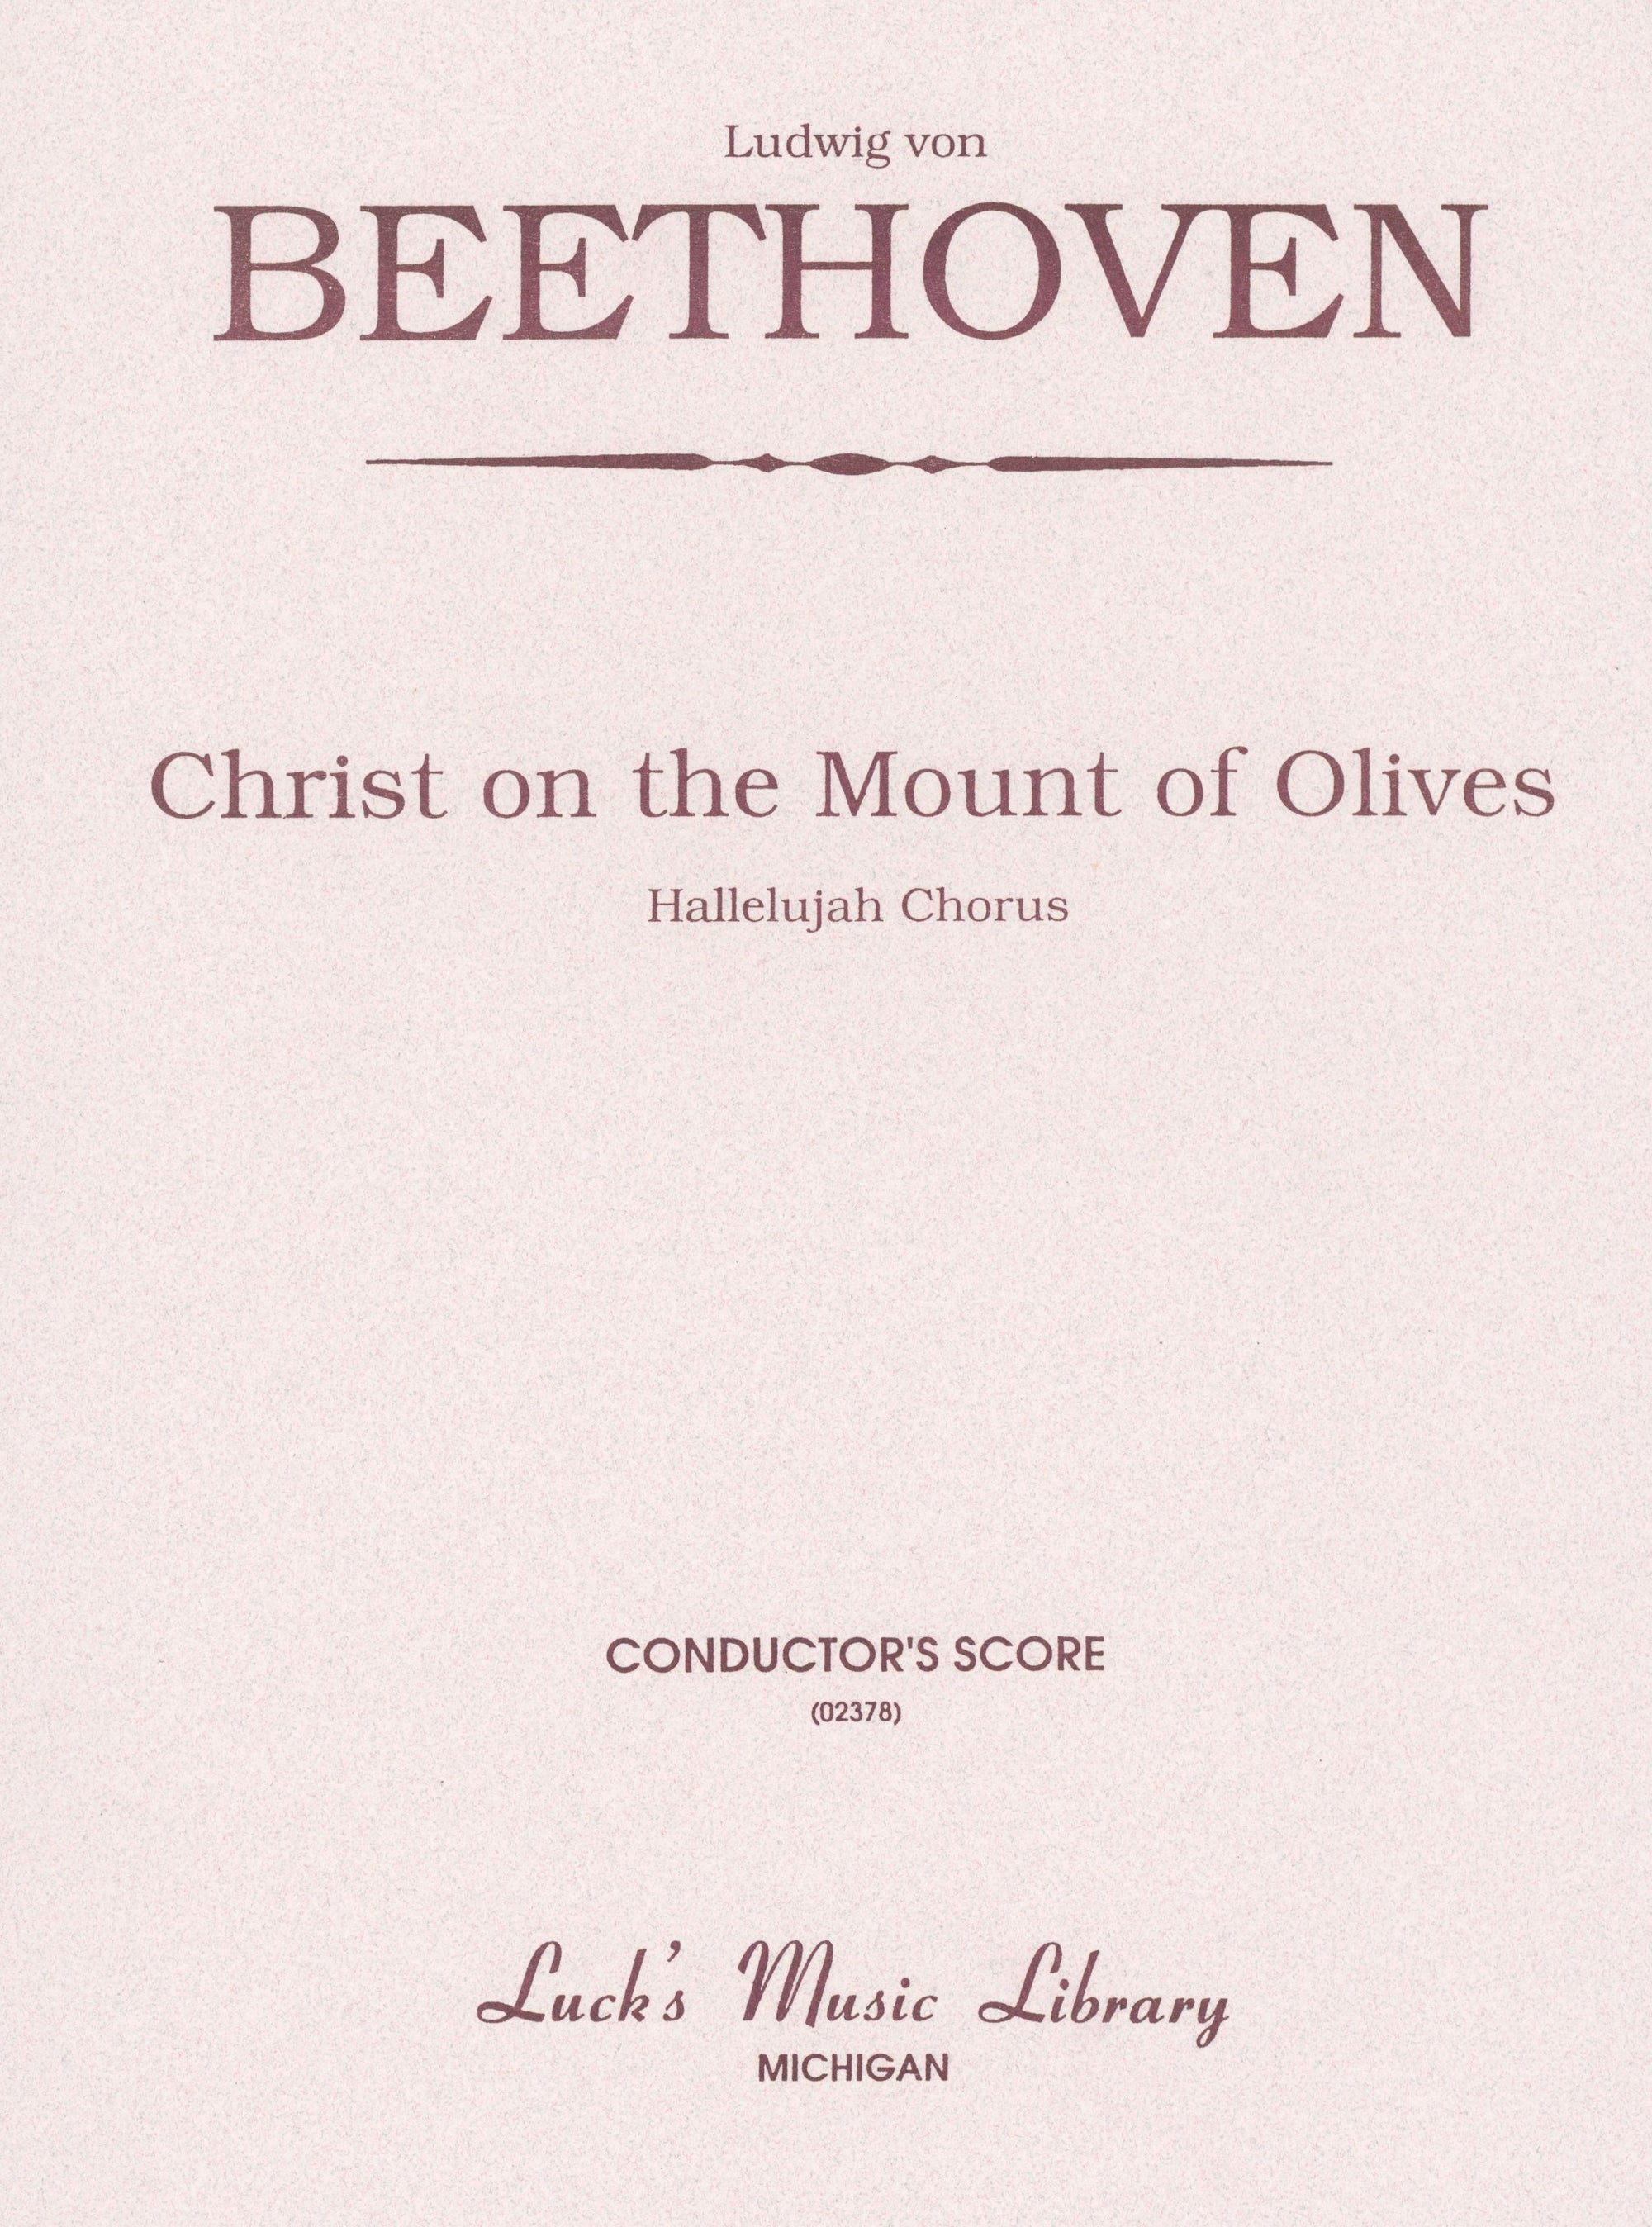 Beethoven: Halleluja from Christ on the Mount of Olives, Op. 85